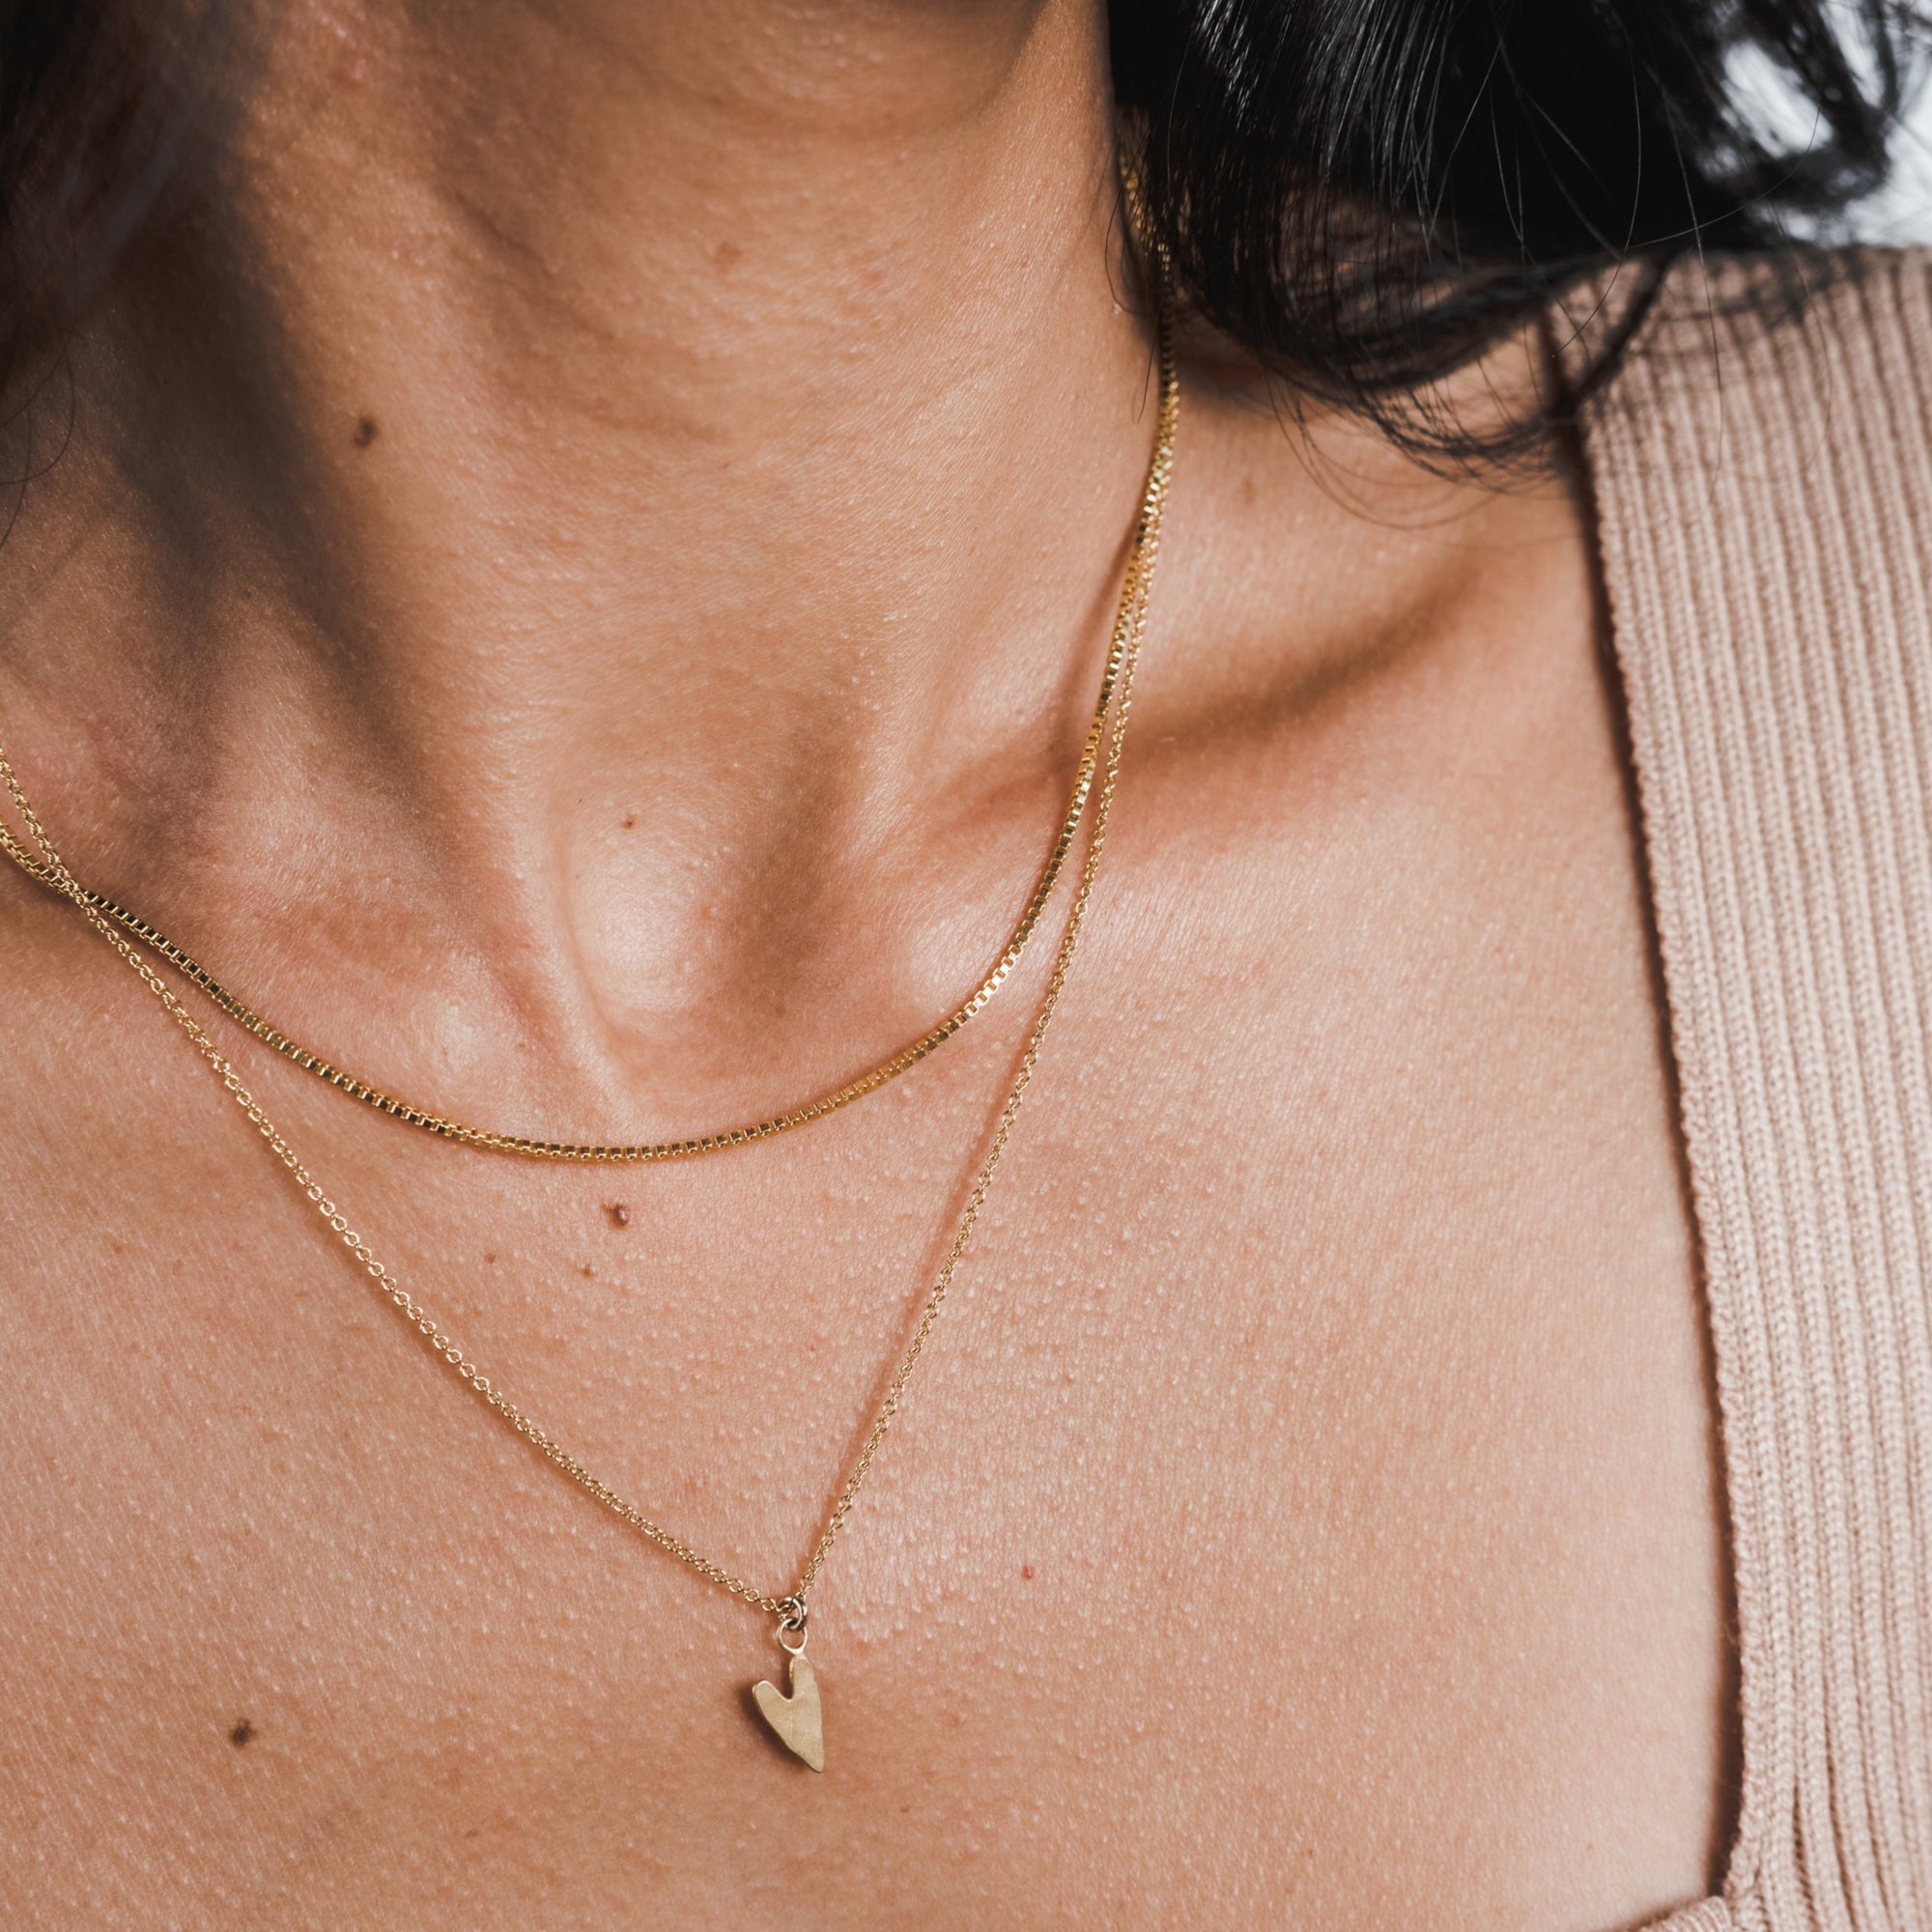 A close-up of a woman&#39;s neck wearing a Becoming Jewelry box chain necklace with a heart pendant.